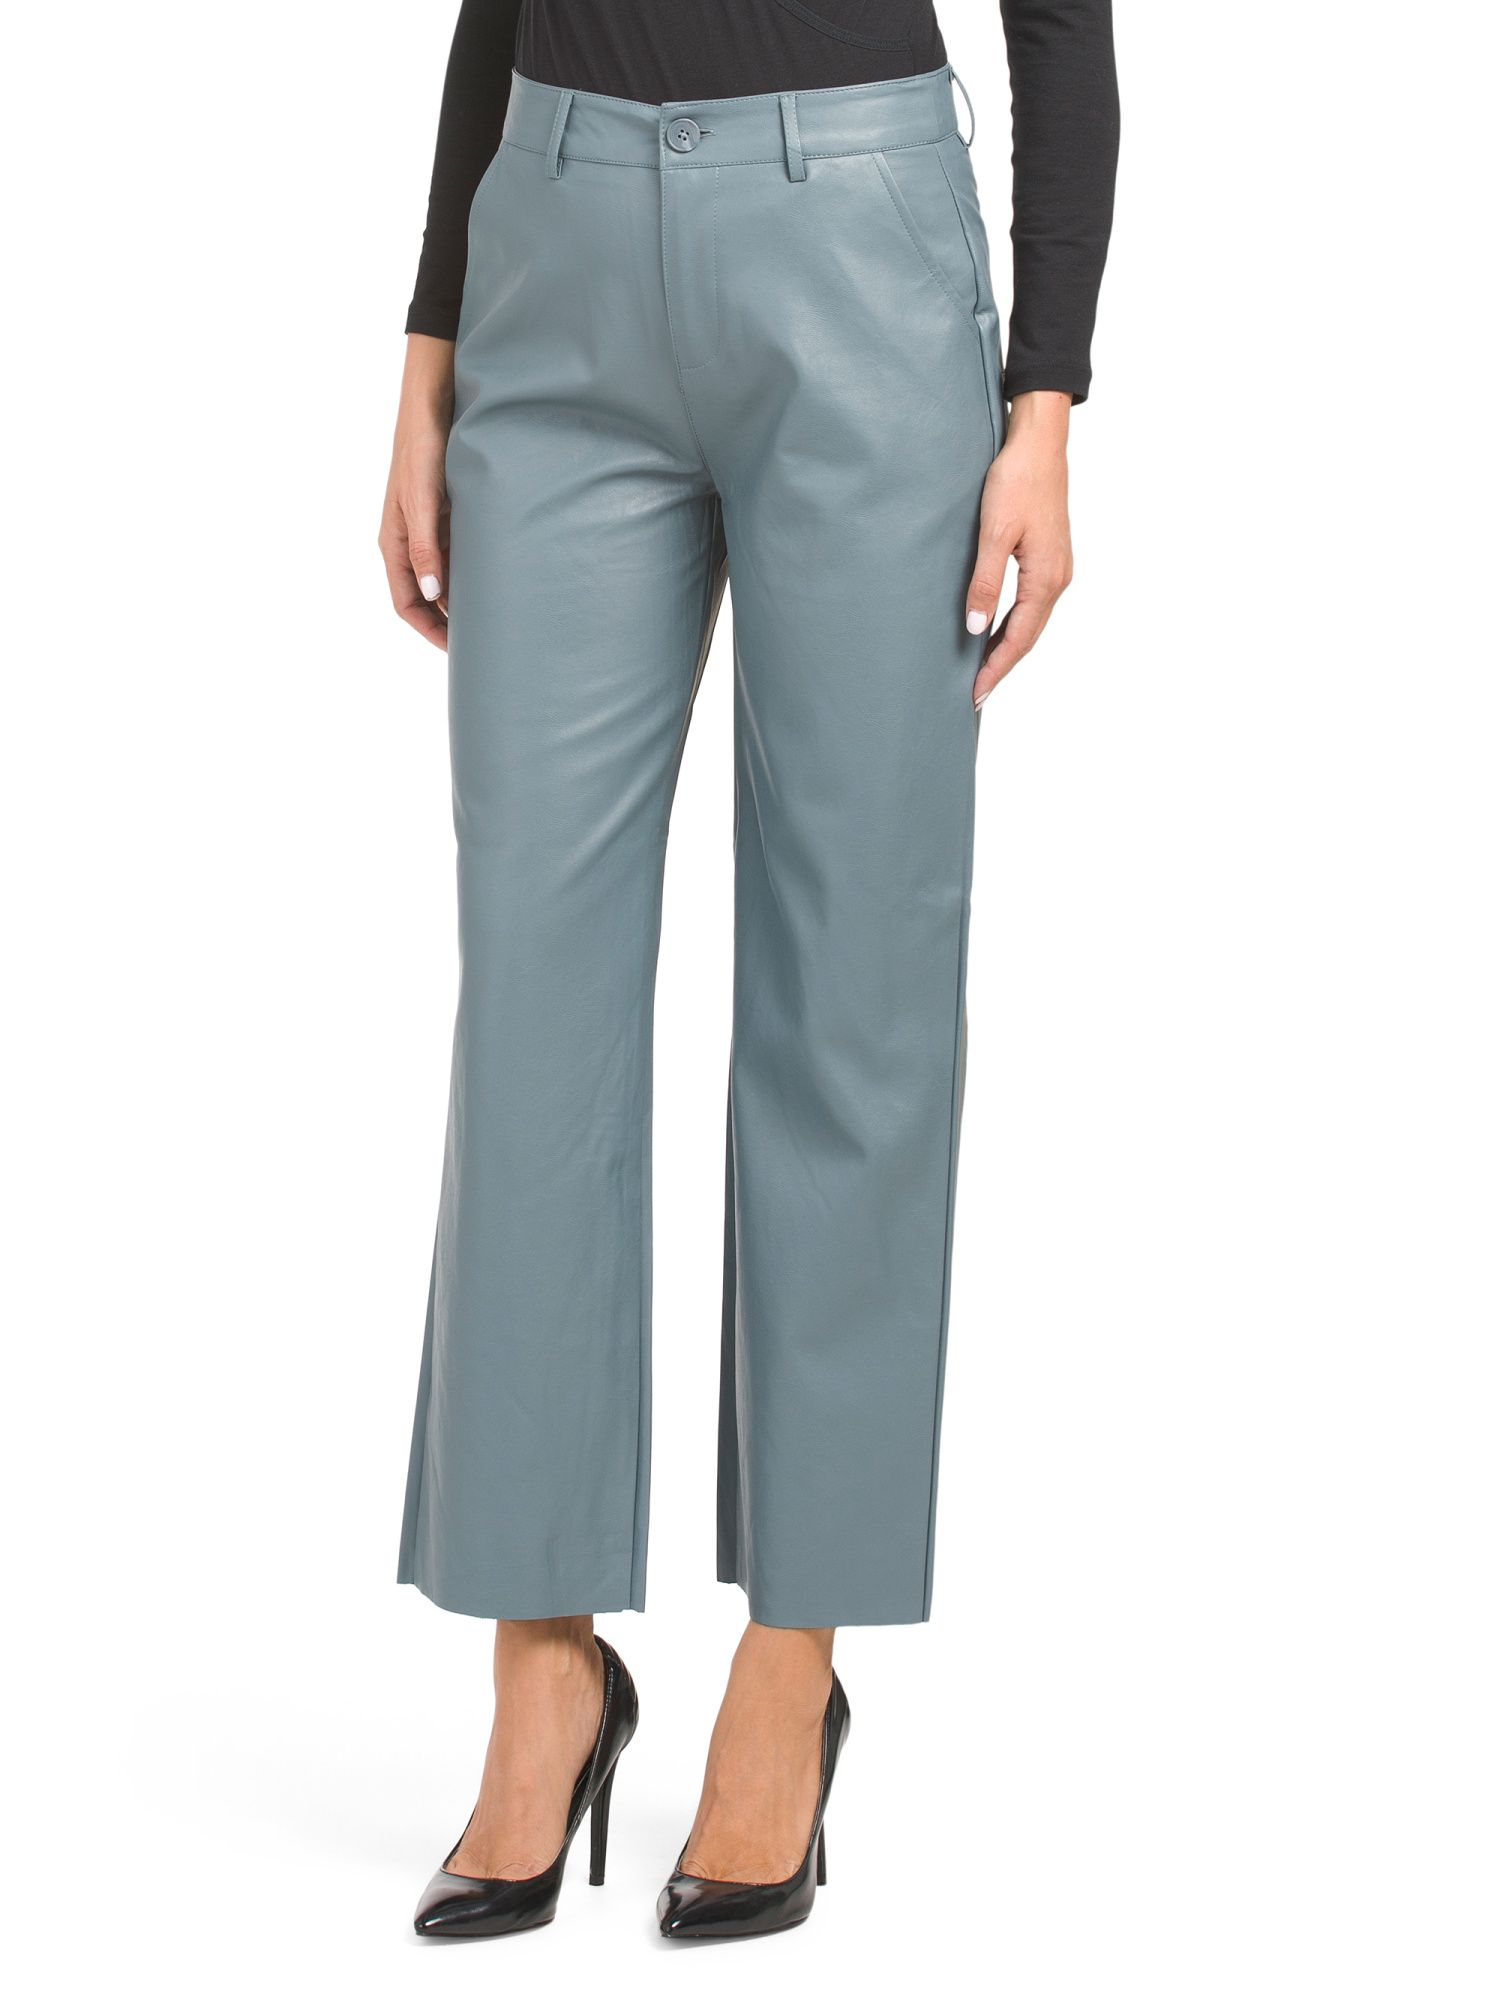 5 Pocket Faux Leather Trousers | TJ Maxx